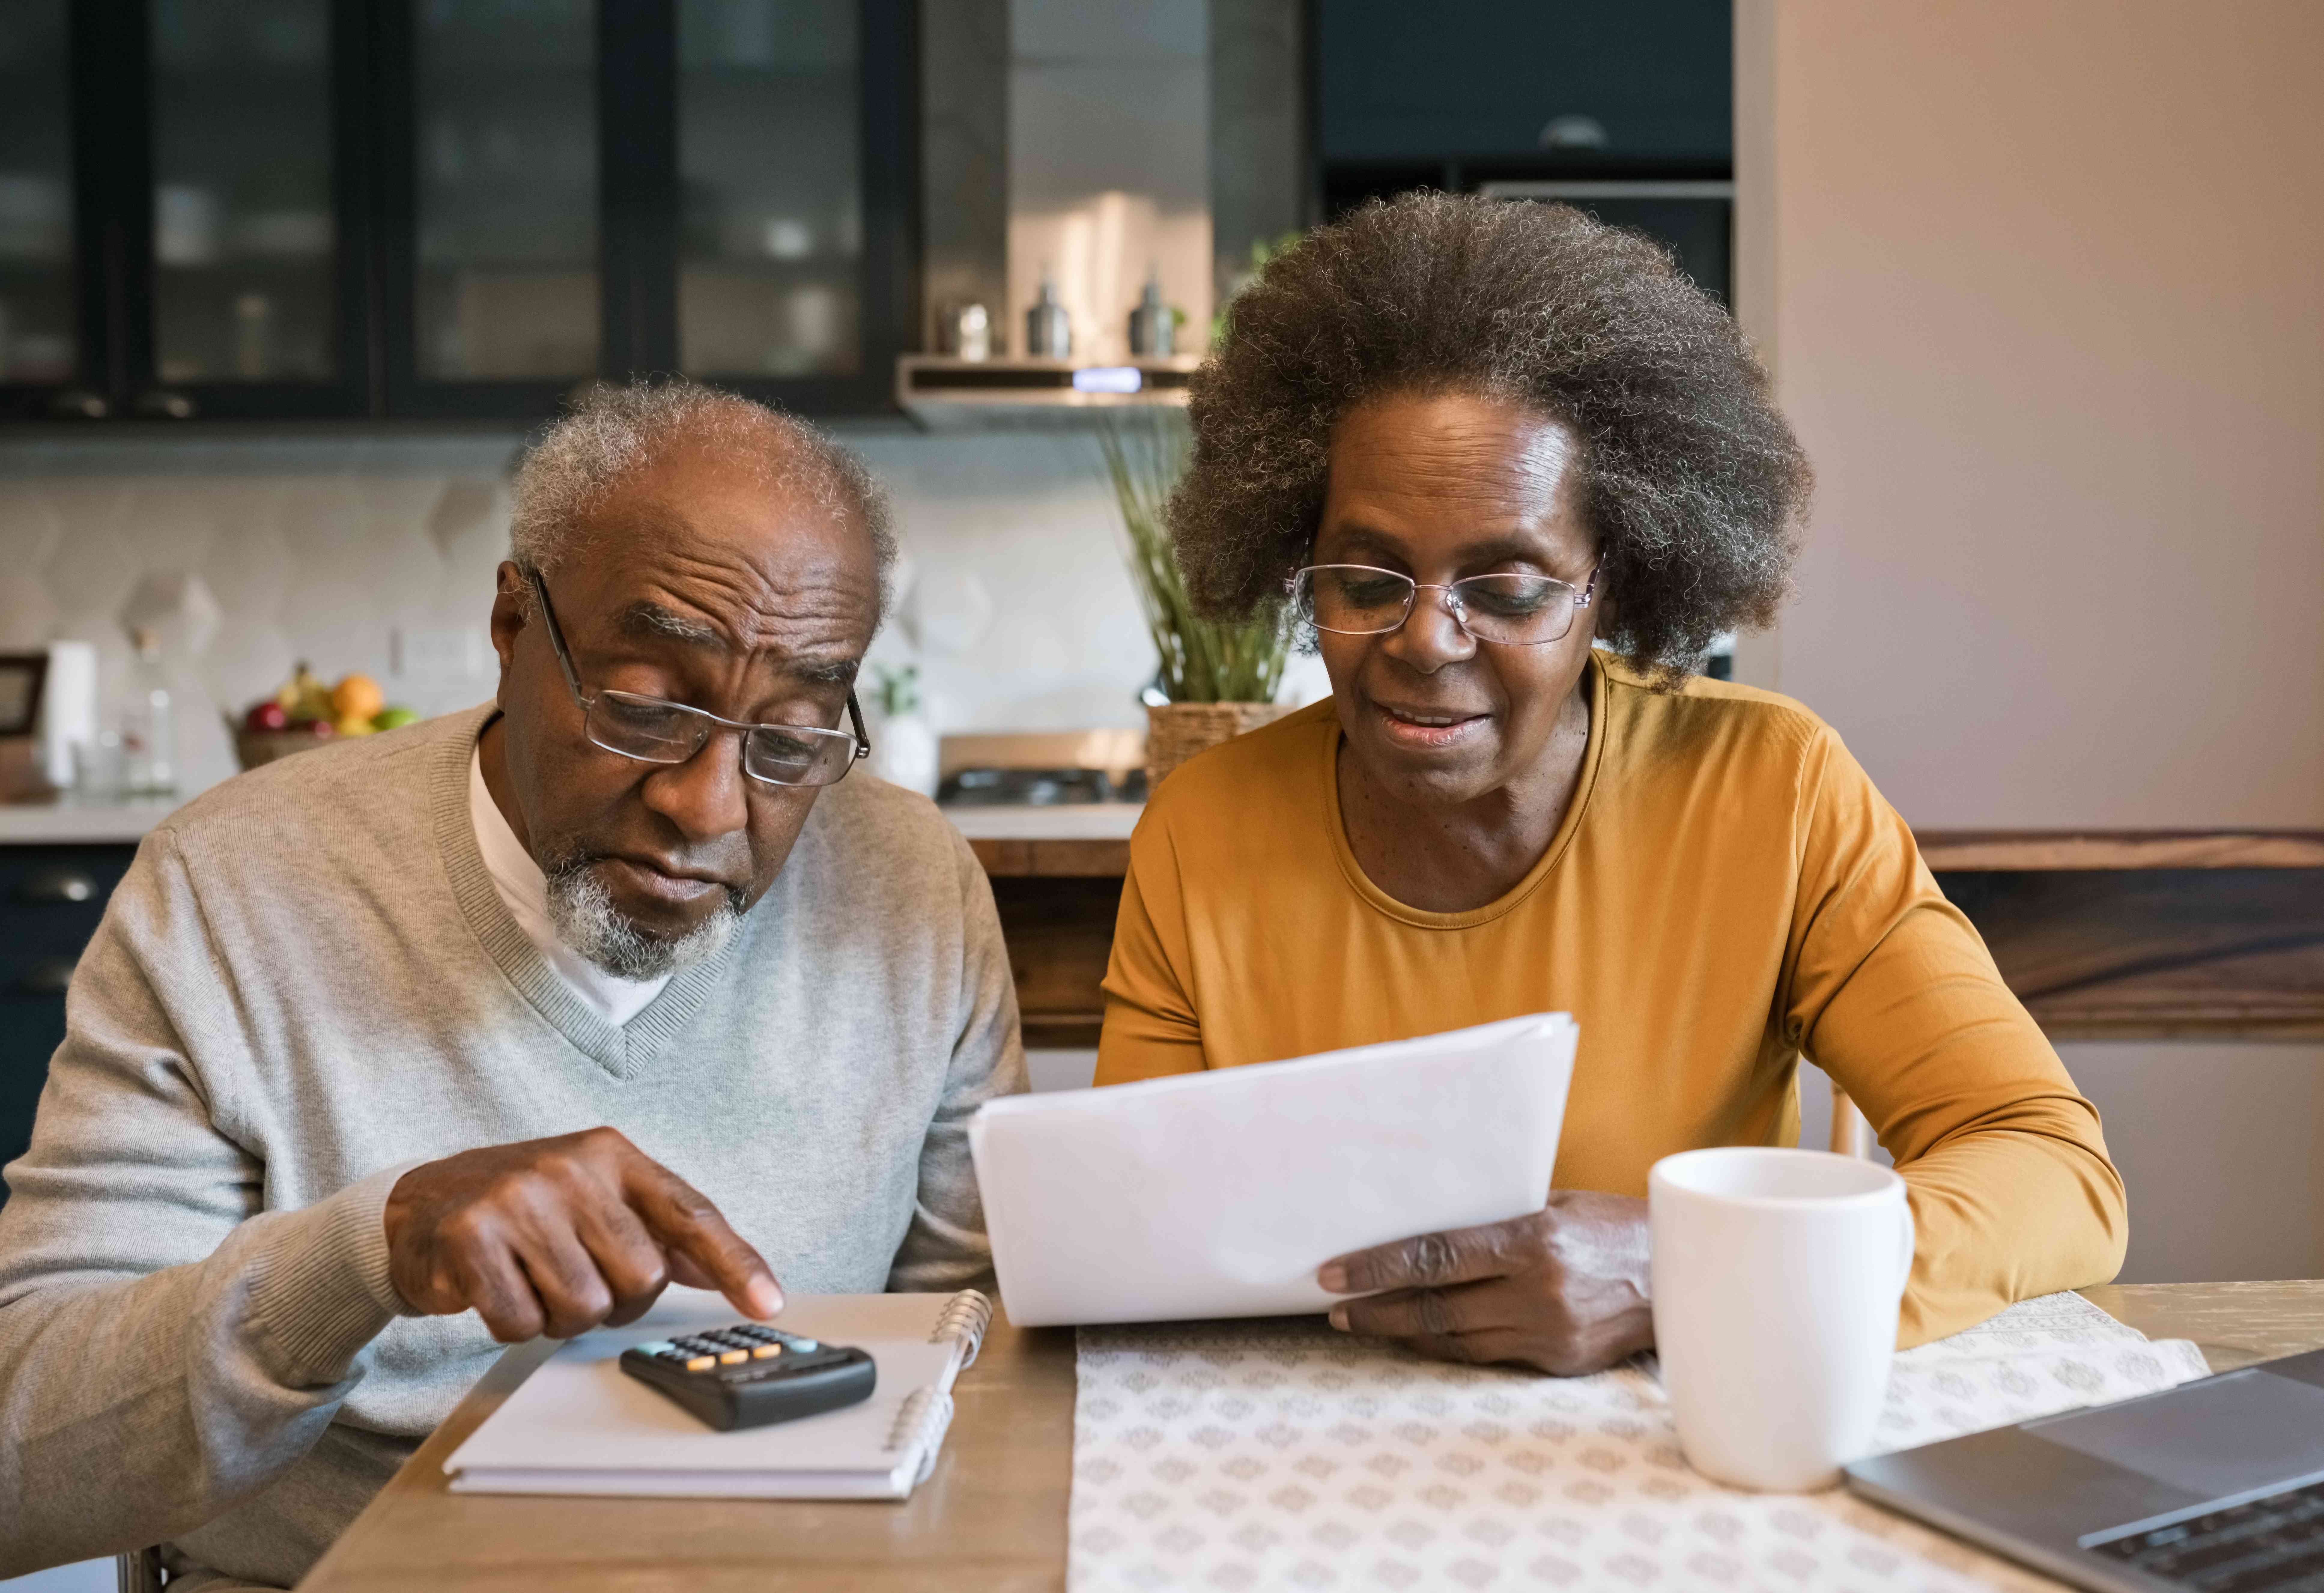 Older man and woman sitting together at kitchen table with financial documents, calculator, and laptop